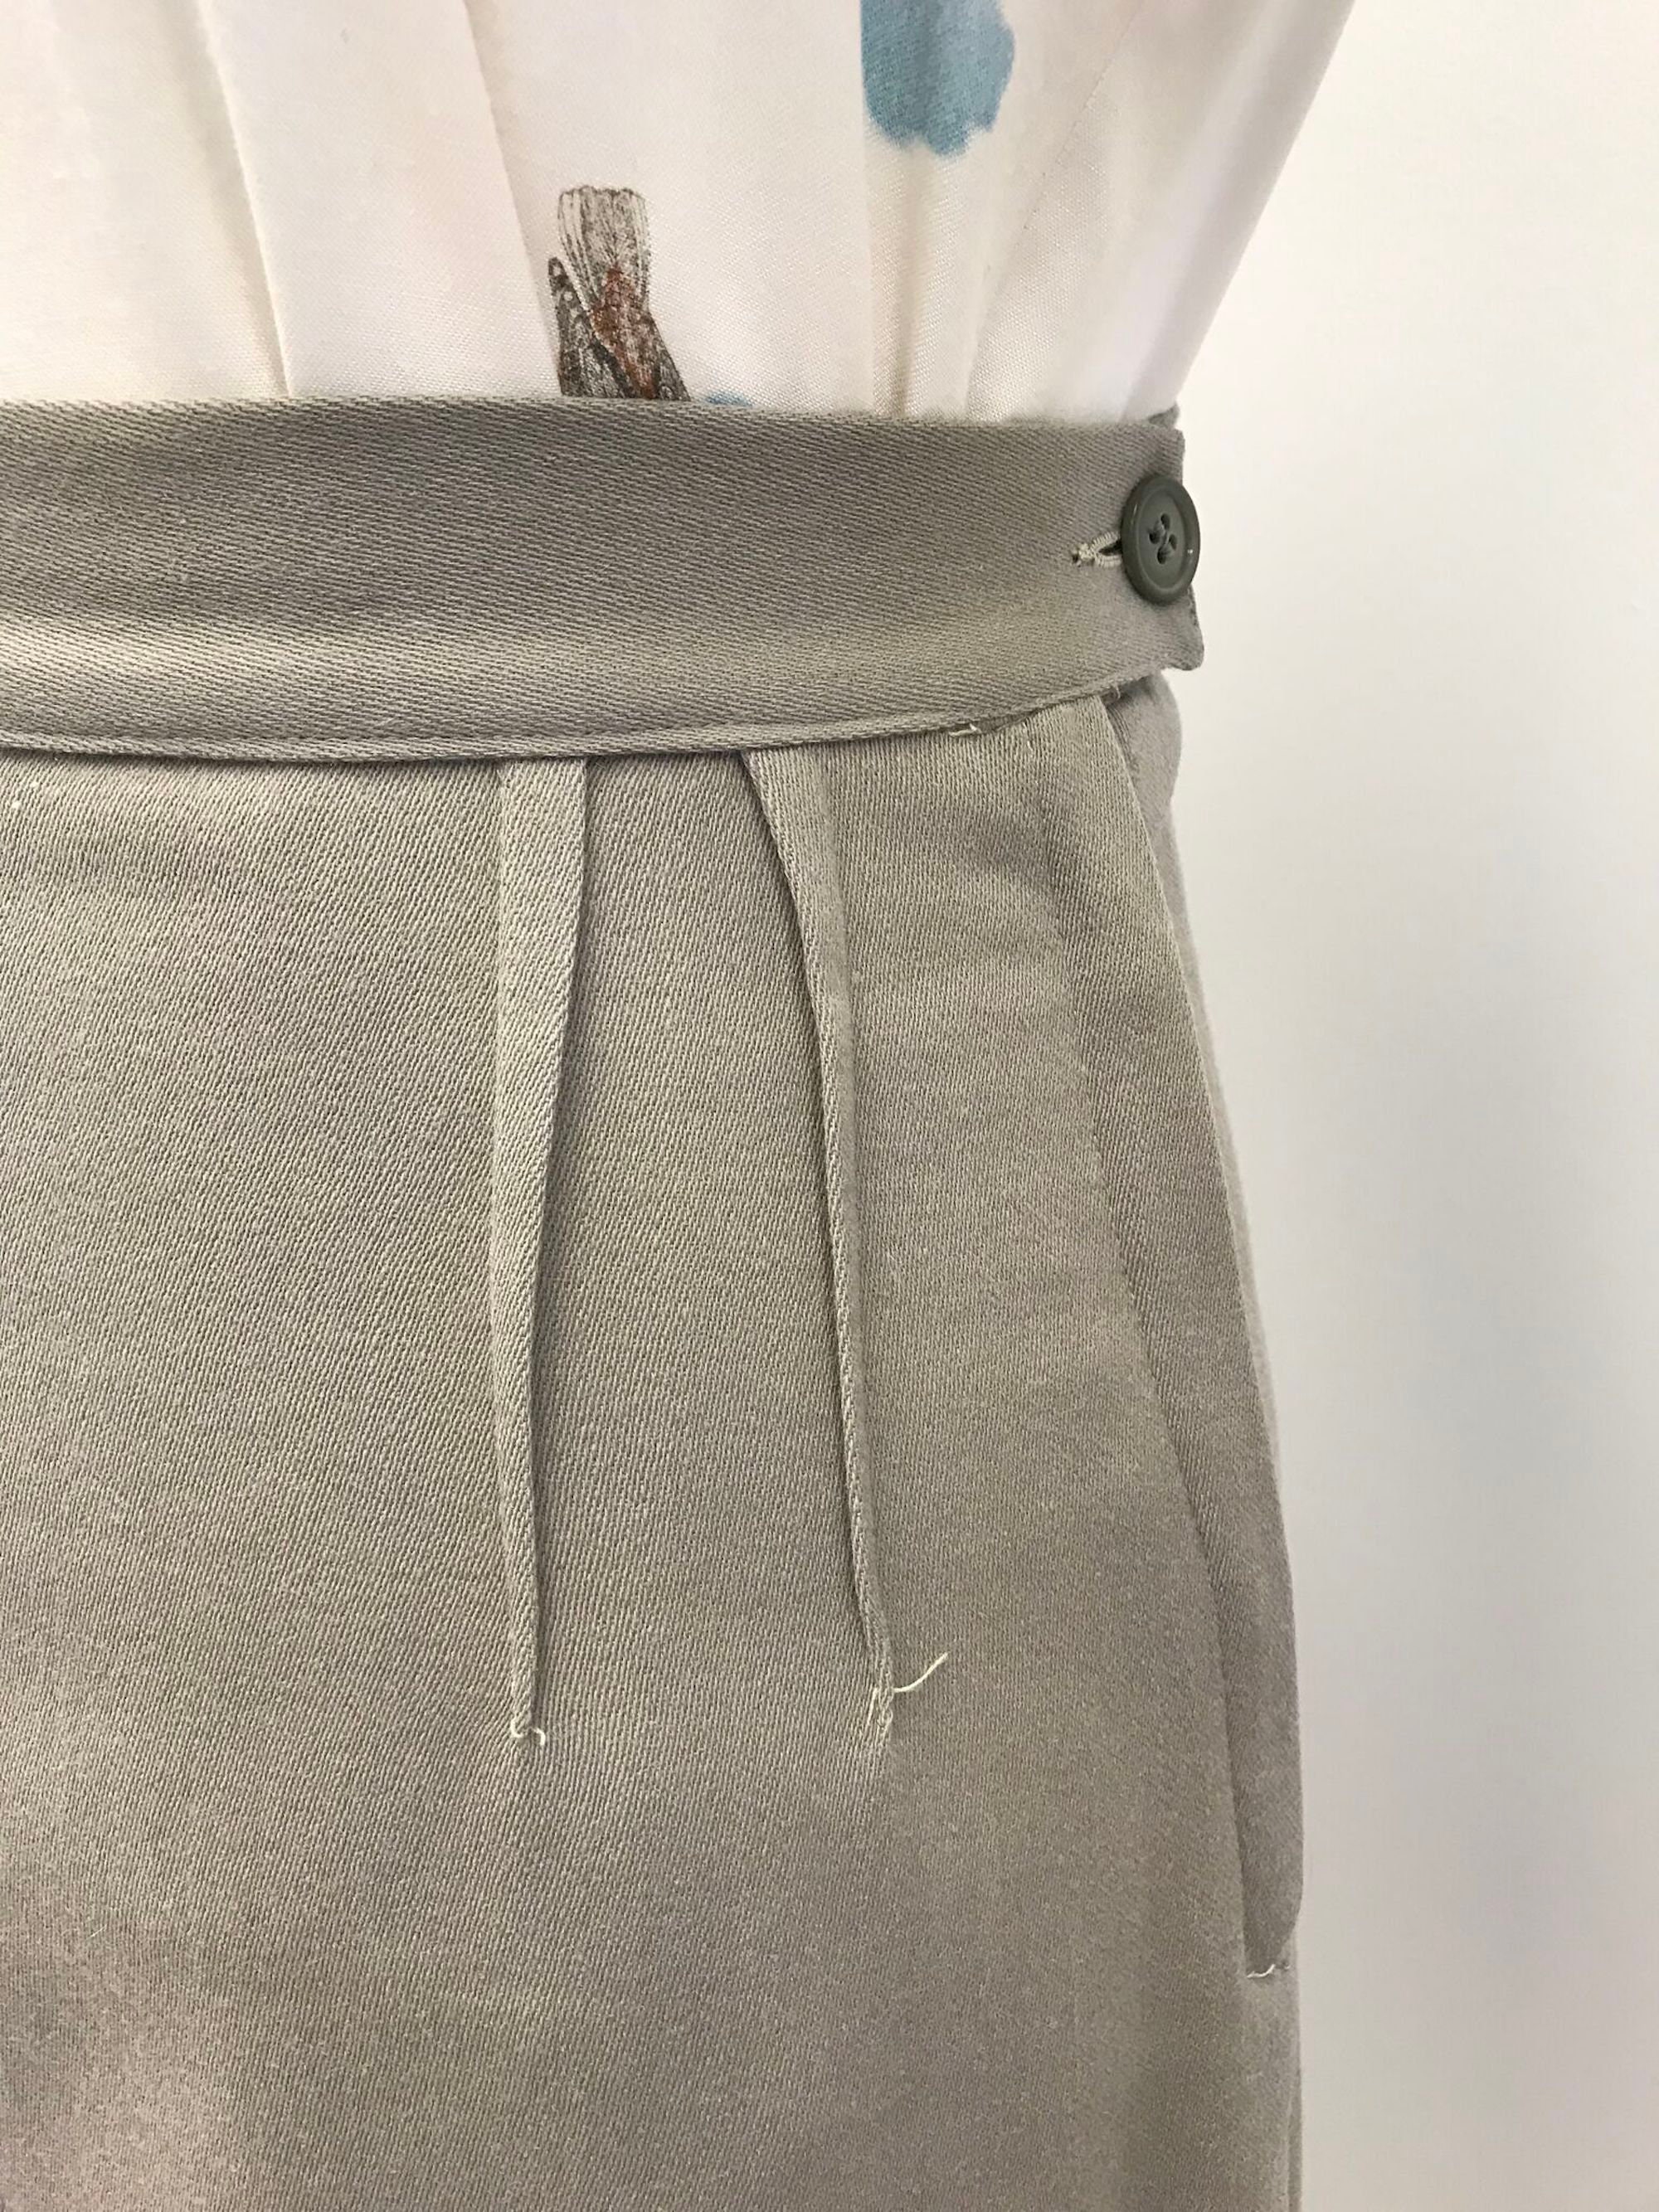 Vintage Late 1940s/early 1950s Taupe Wool Gabardine Skirt - Etsy